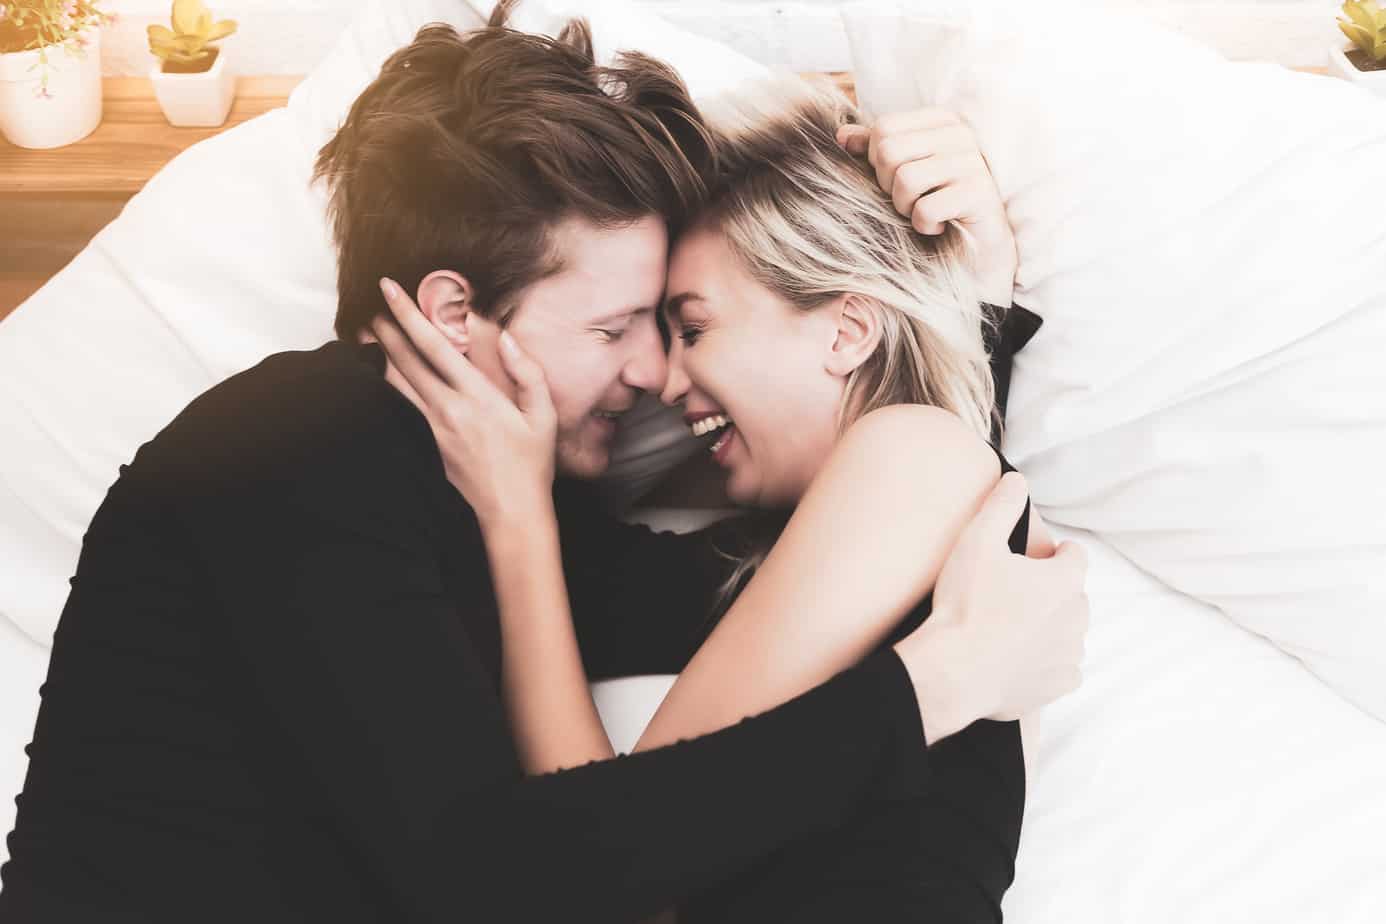 header for reasons why i love you list - attractive couple laughing and cuddling in bed white sheets